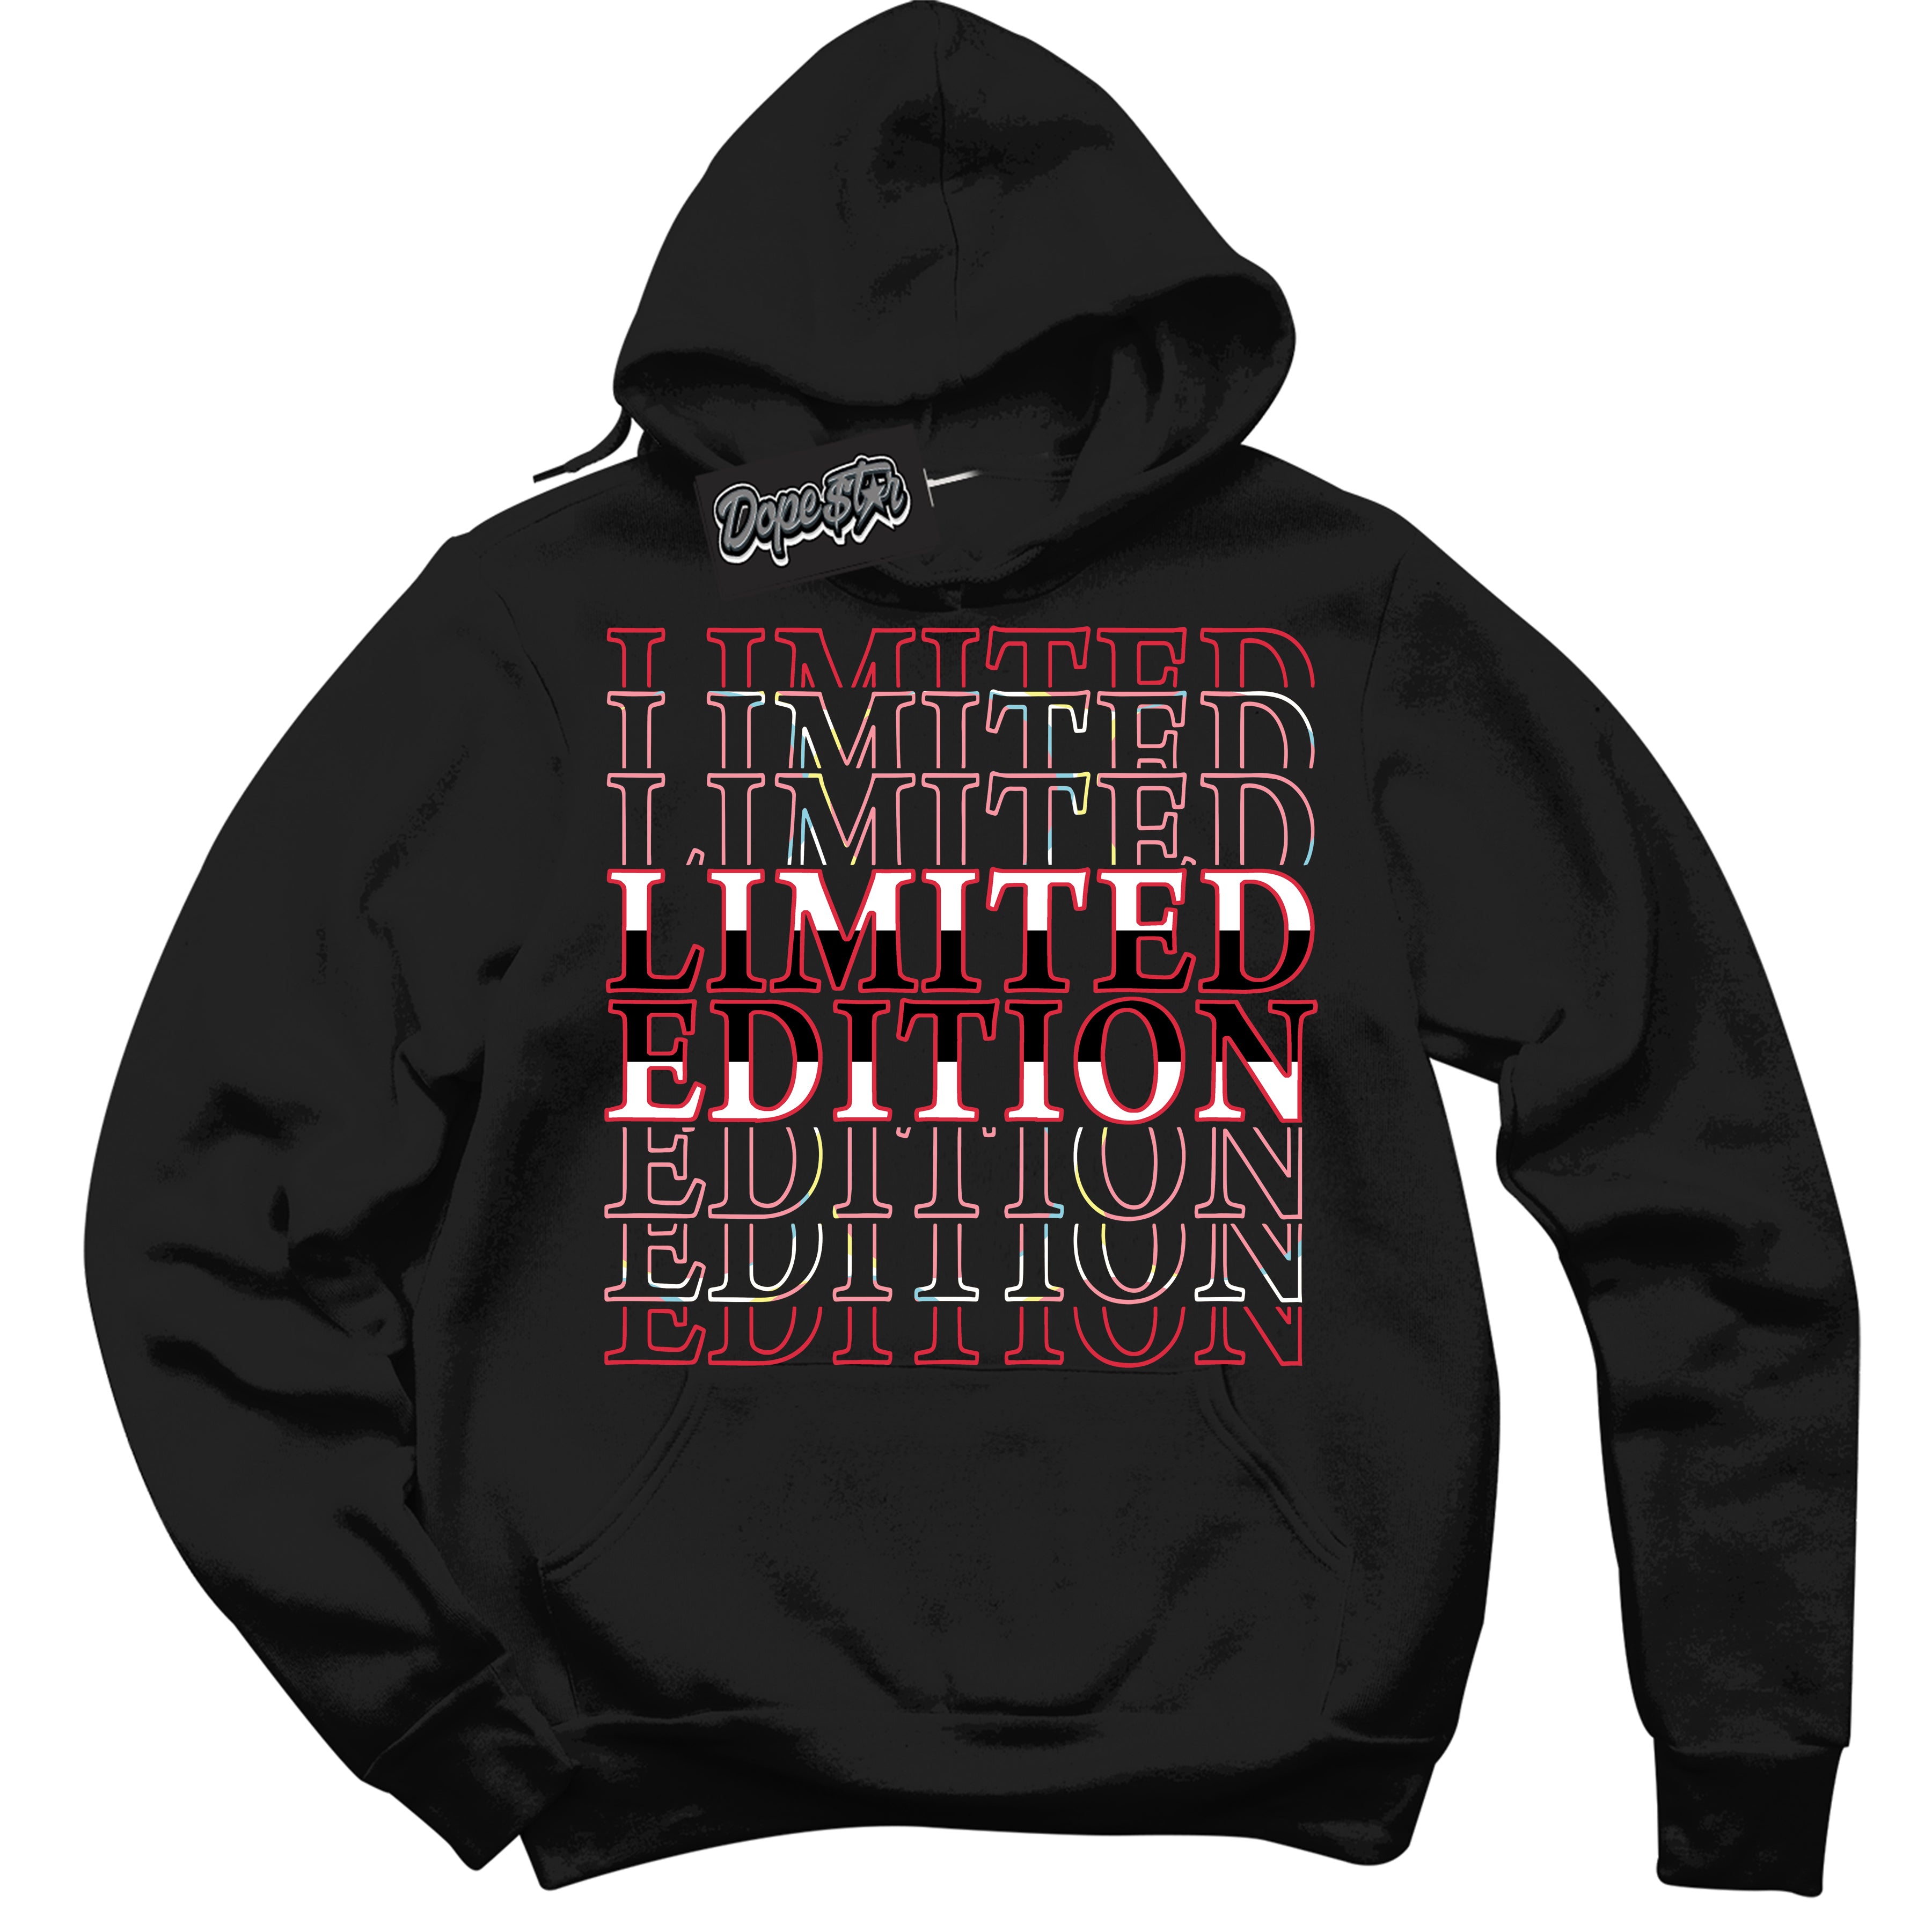 Cool Black Graphic DopeStar Hoodie with “ Limited Edition “ print, that perfectly matches Spider-Verse 1s sneakers